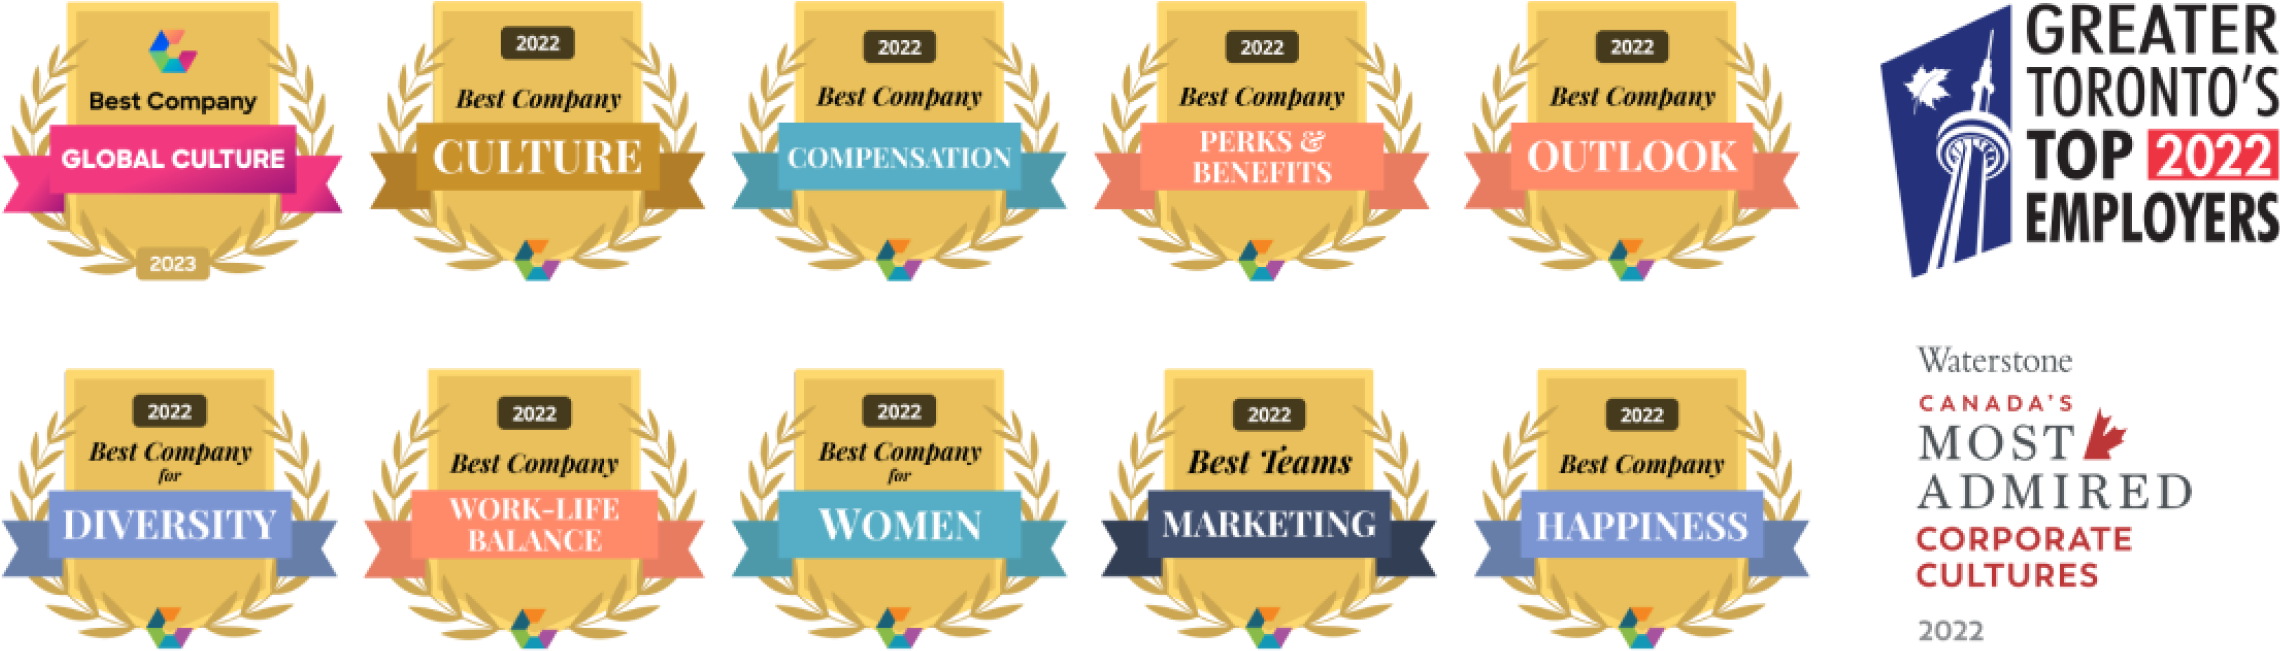 A graphic featuring several of the Awards Vena won.